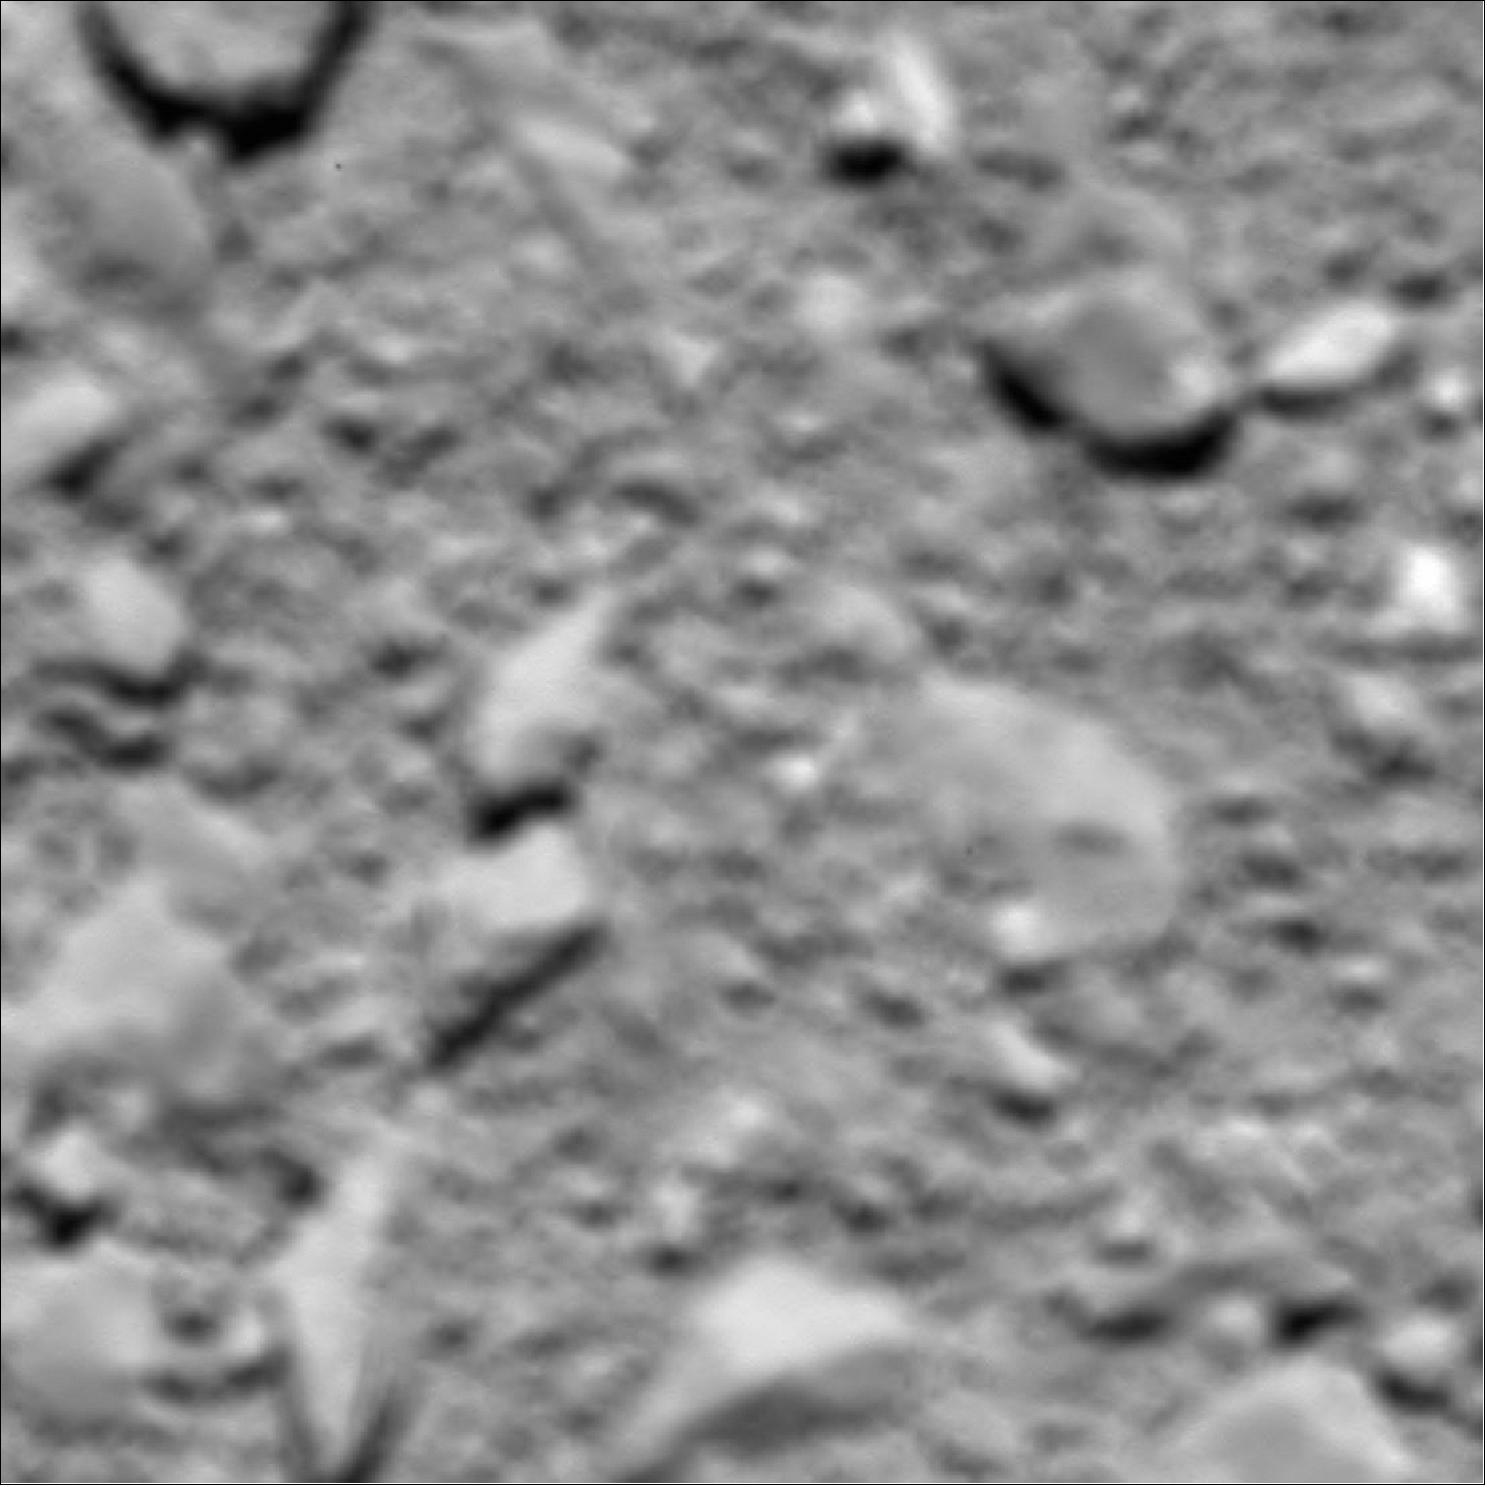 Figure 90: Rosetta's last image of Comet 67P/Churyumov-Gerasimenko, taken with the OSIRIS wide-angle camera shortly before impact, at an estimated altitude of about 20 m above the surface (image credit: ESA/Rosetta/MPS for OSIRIS Team MPS/UPD/LAM/IAA/SSO/INTA/UPM/DASP/IDA)